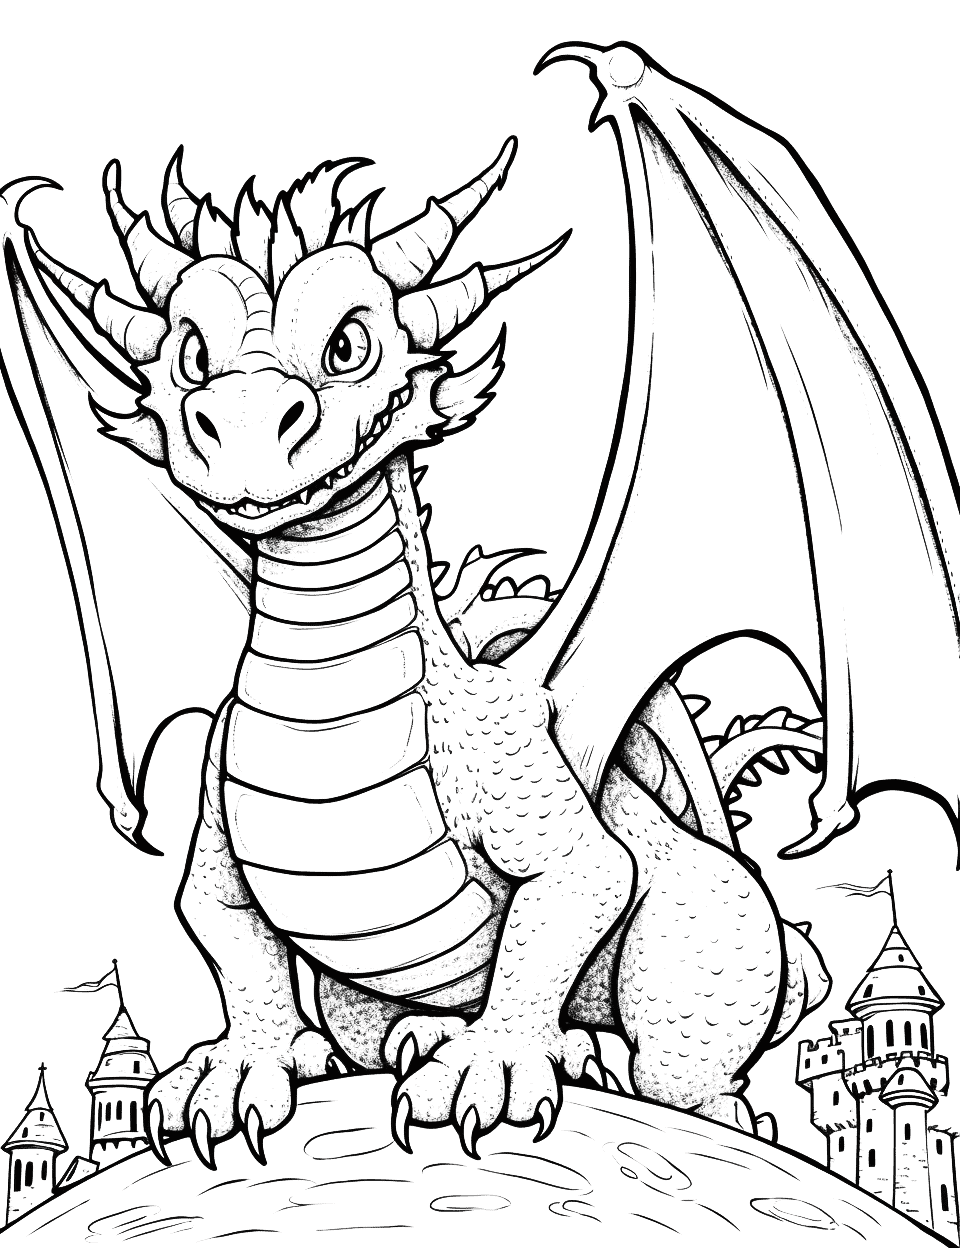 Detailed Dragon Coloring Page - An intricate, detailed dragon, next to a castle tower.